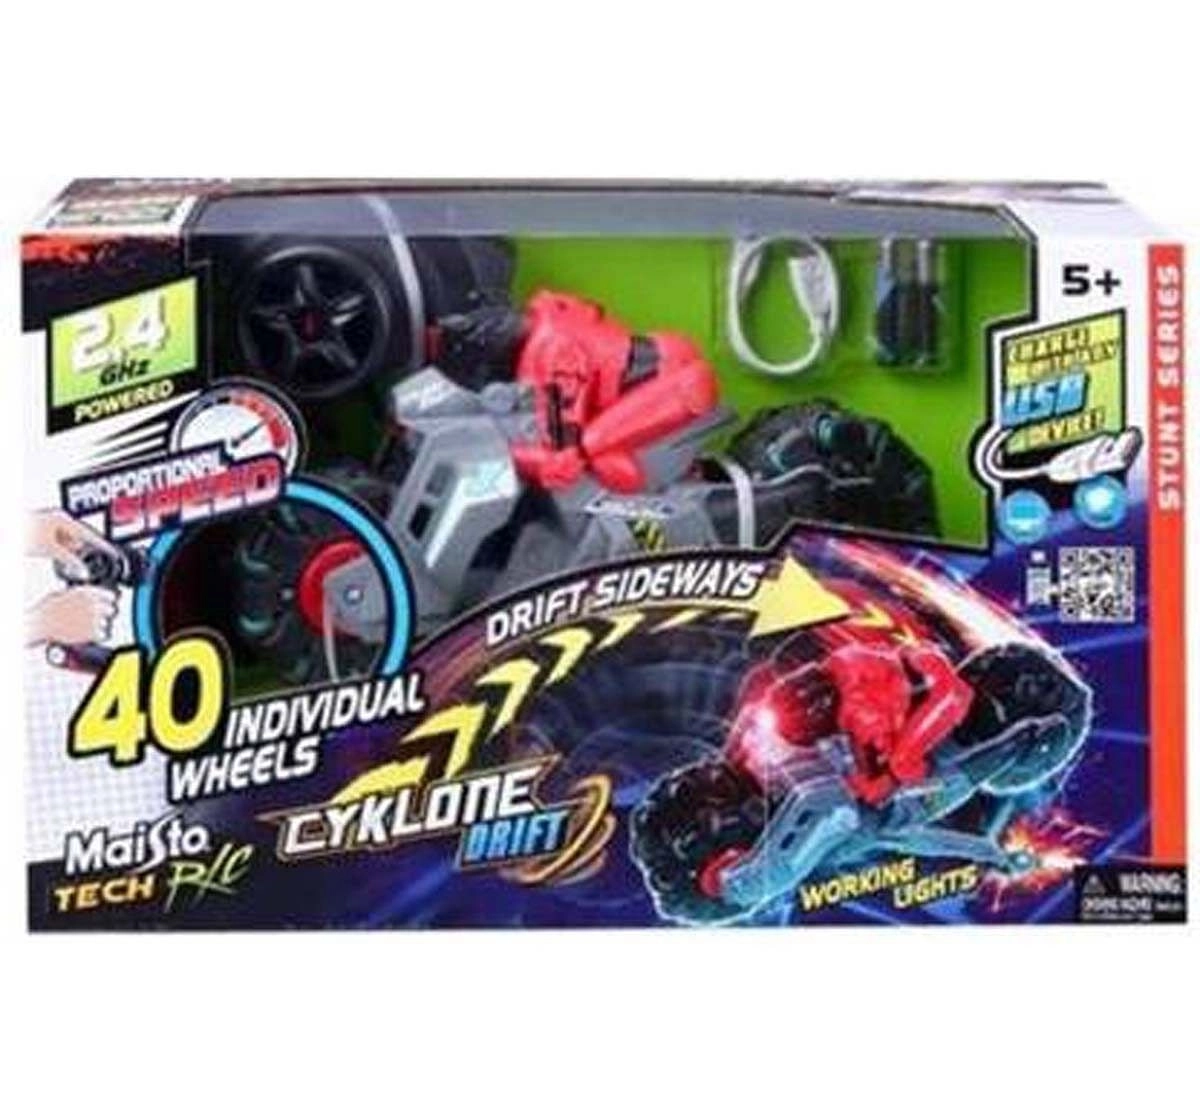 Maisto Cyclone Drift Remote Controlled Car Toys for Kids age 5Y+ 